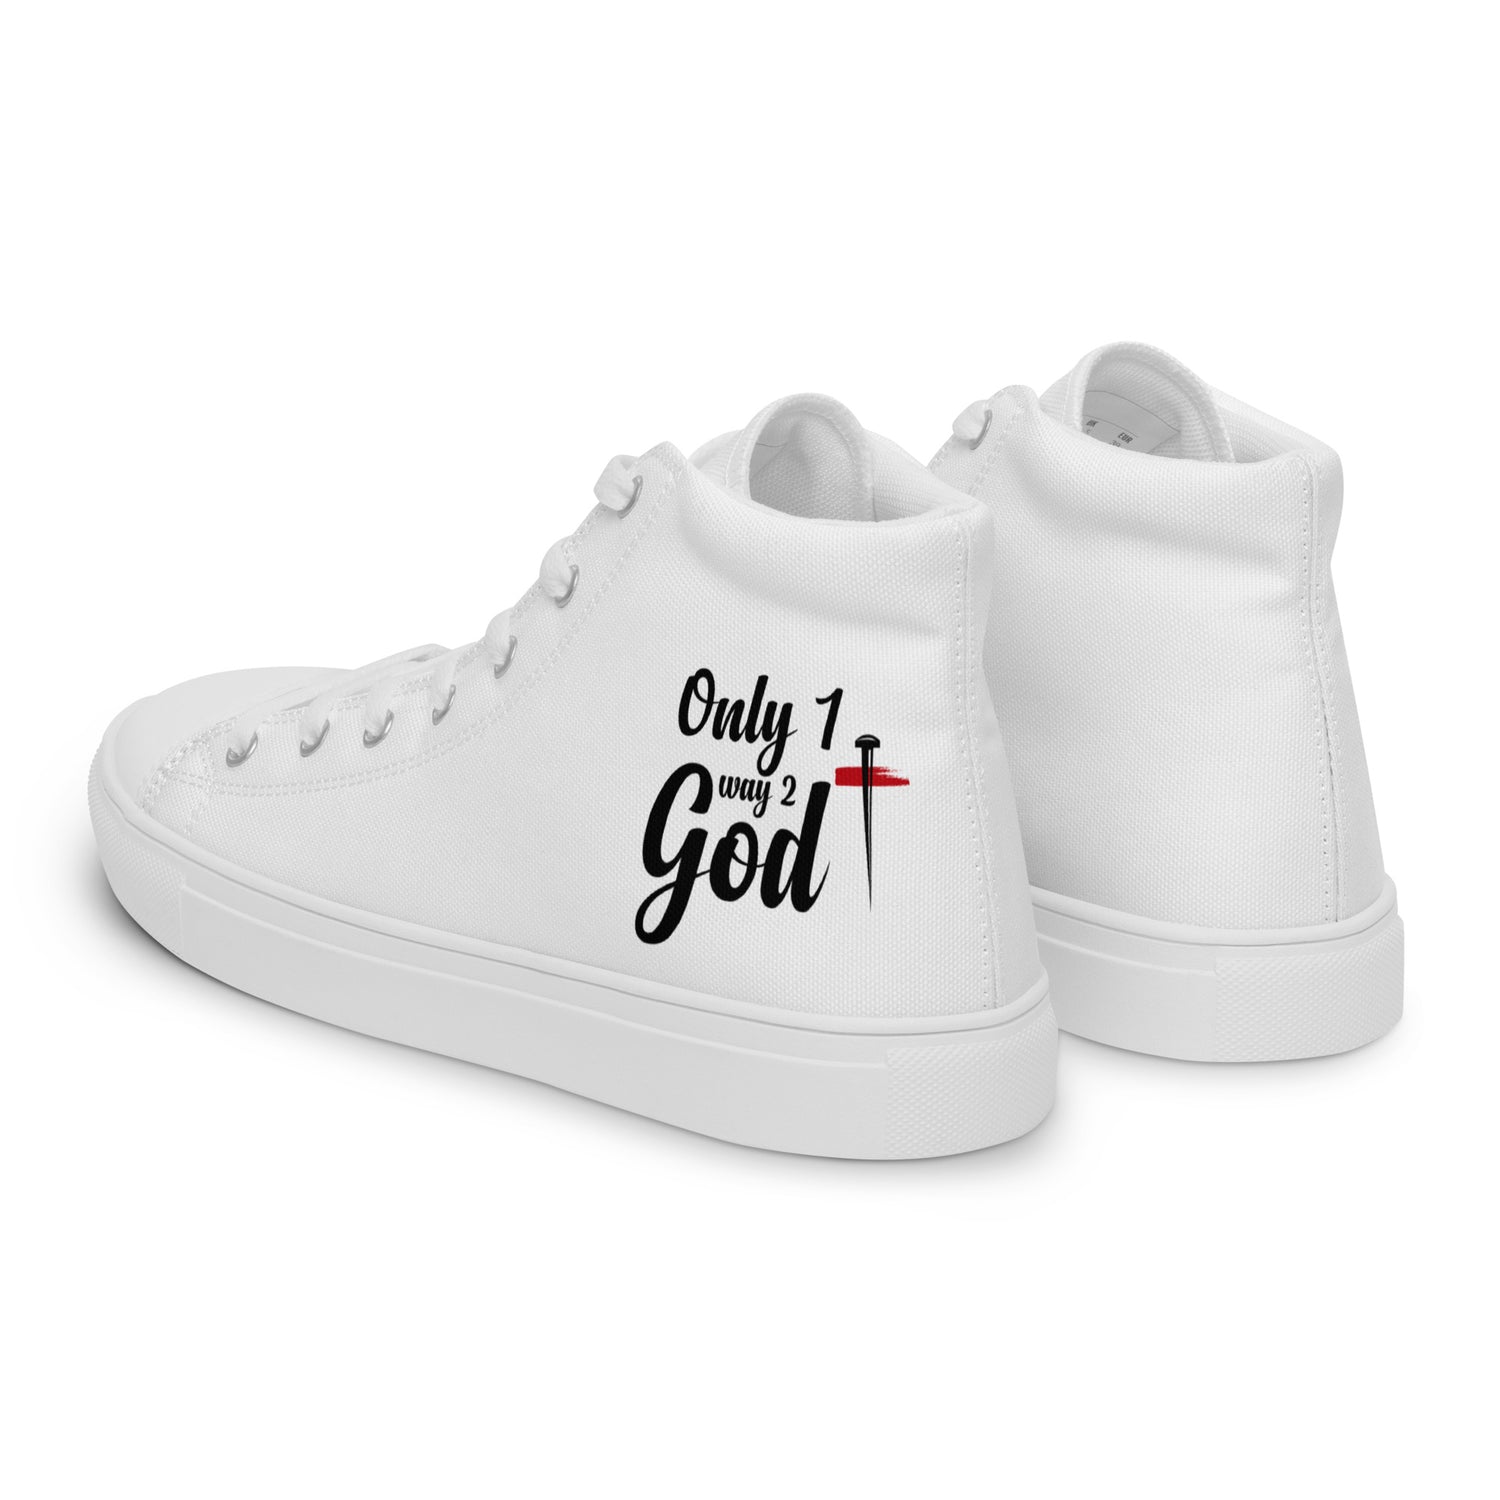 ONLY 1 WAY 2 GOD WOMENS SHOES